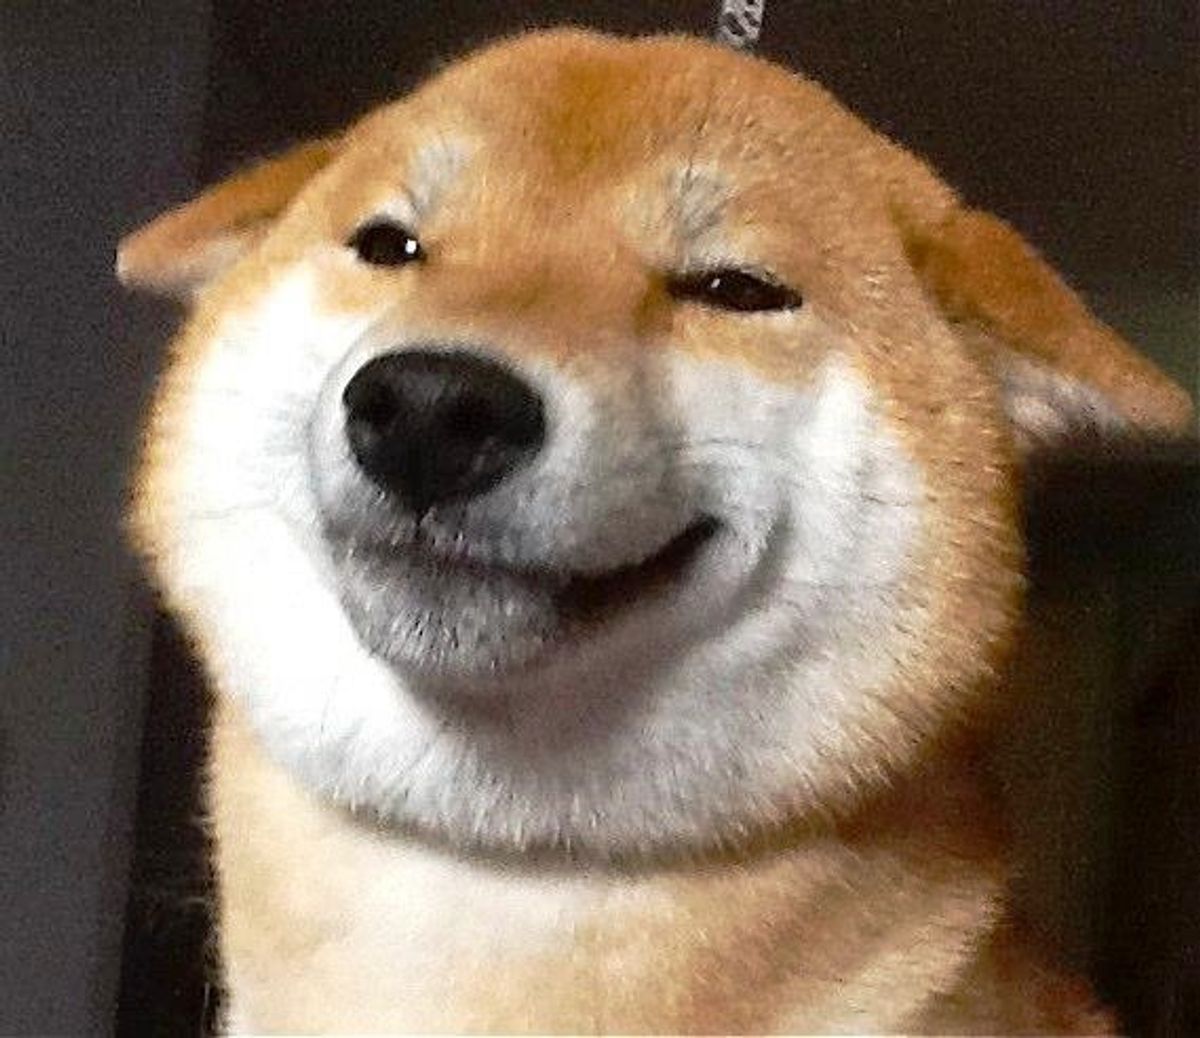 21 Pictures That Prove Shiba Inus Are The Quirkiest Dogs Ever